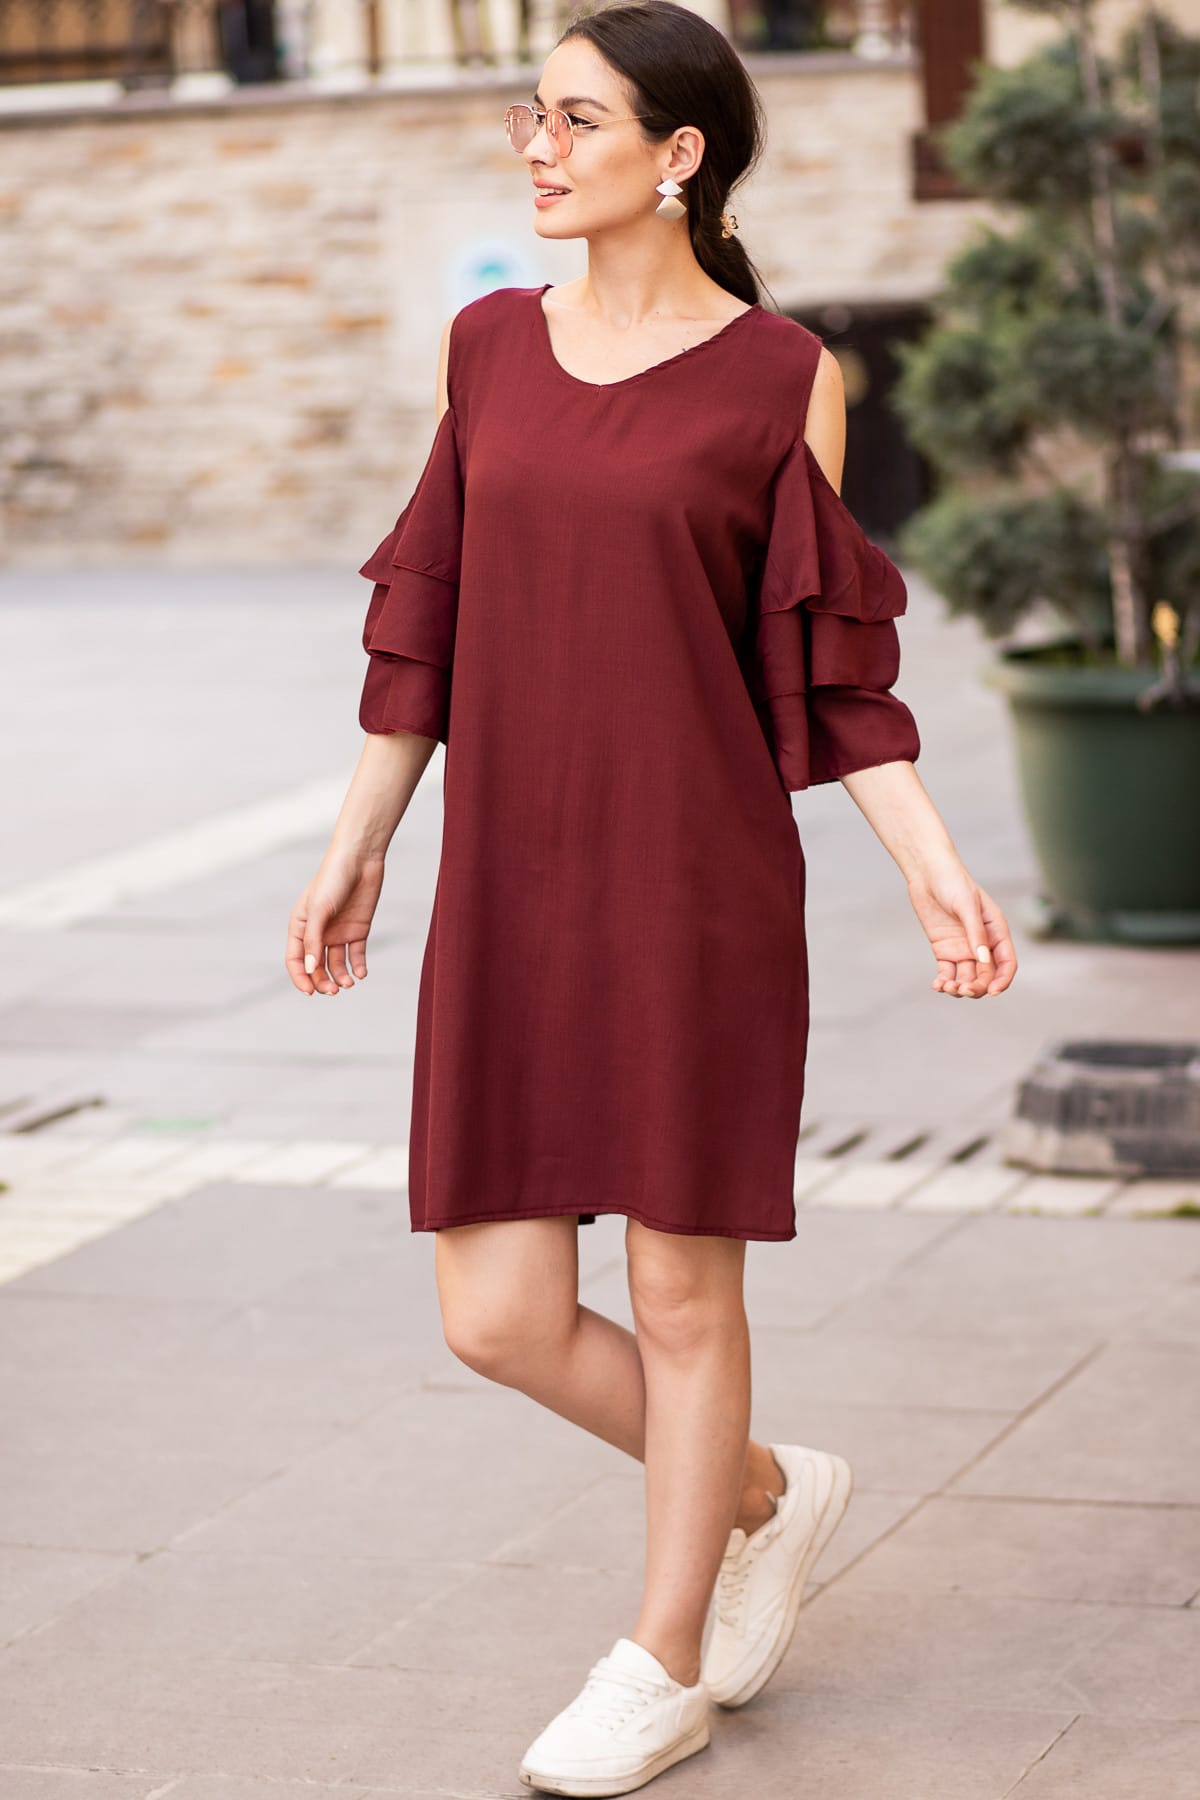 Levně armonika Women's Burgundy V-Neck Dress with Open Shoulders and Ruffled Sleeves